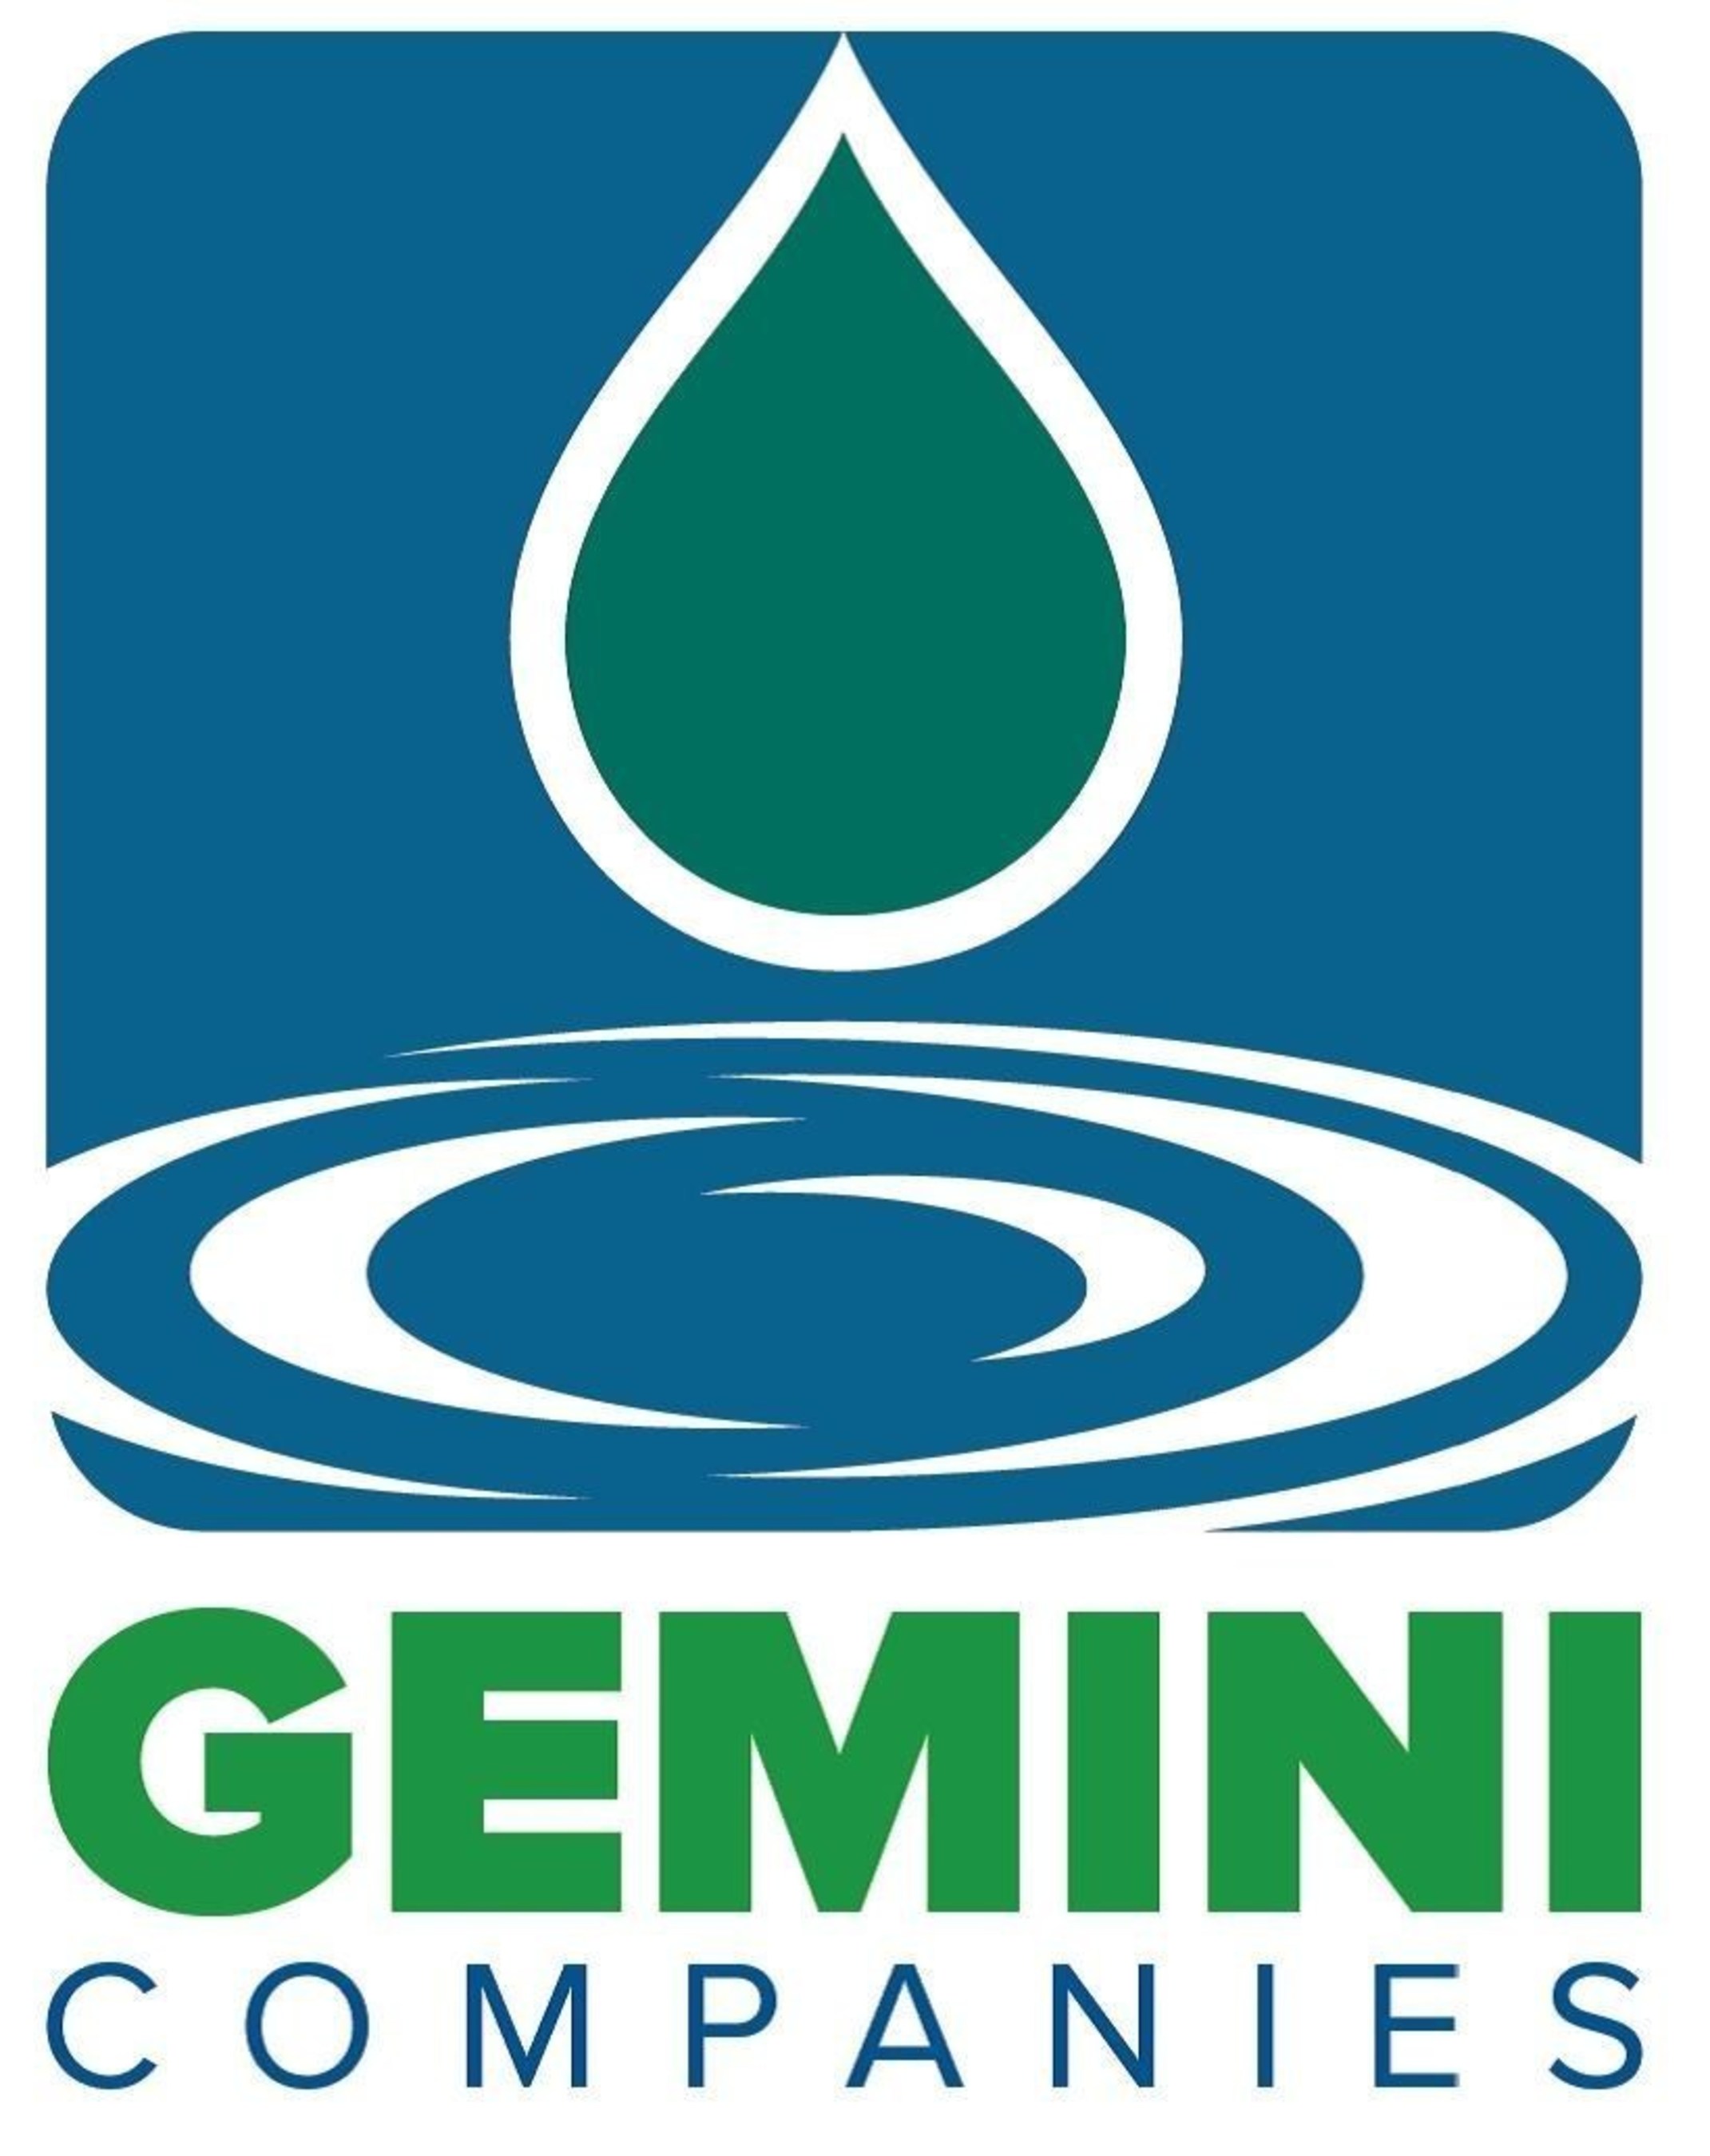 The Gemini Companies provide investment companies with a single point of access to multiple solutions for pooled investment products. The individual service firms within The Gemini Companies - Gemini Fund Services, Gemini Hedge Fund Services, Gemini Alternative Funds - were built on innovation, client partnerships and service, and their teams possess expertise in fund administration, accounting, technology, compliance and reporting. The Gemini Companies are backed by parent company NorthStar Financial...